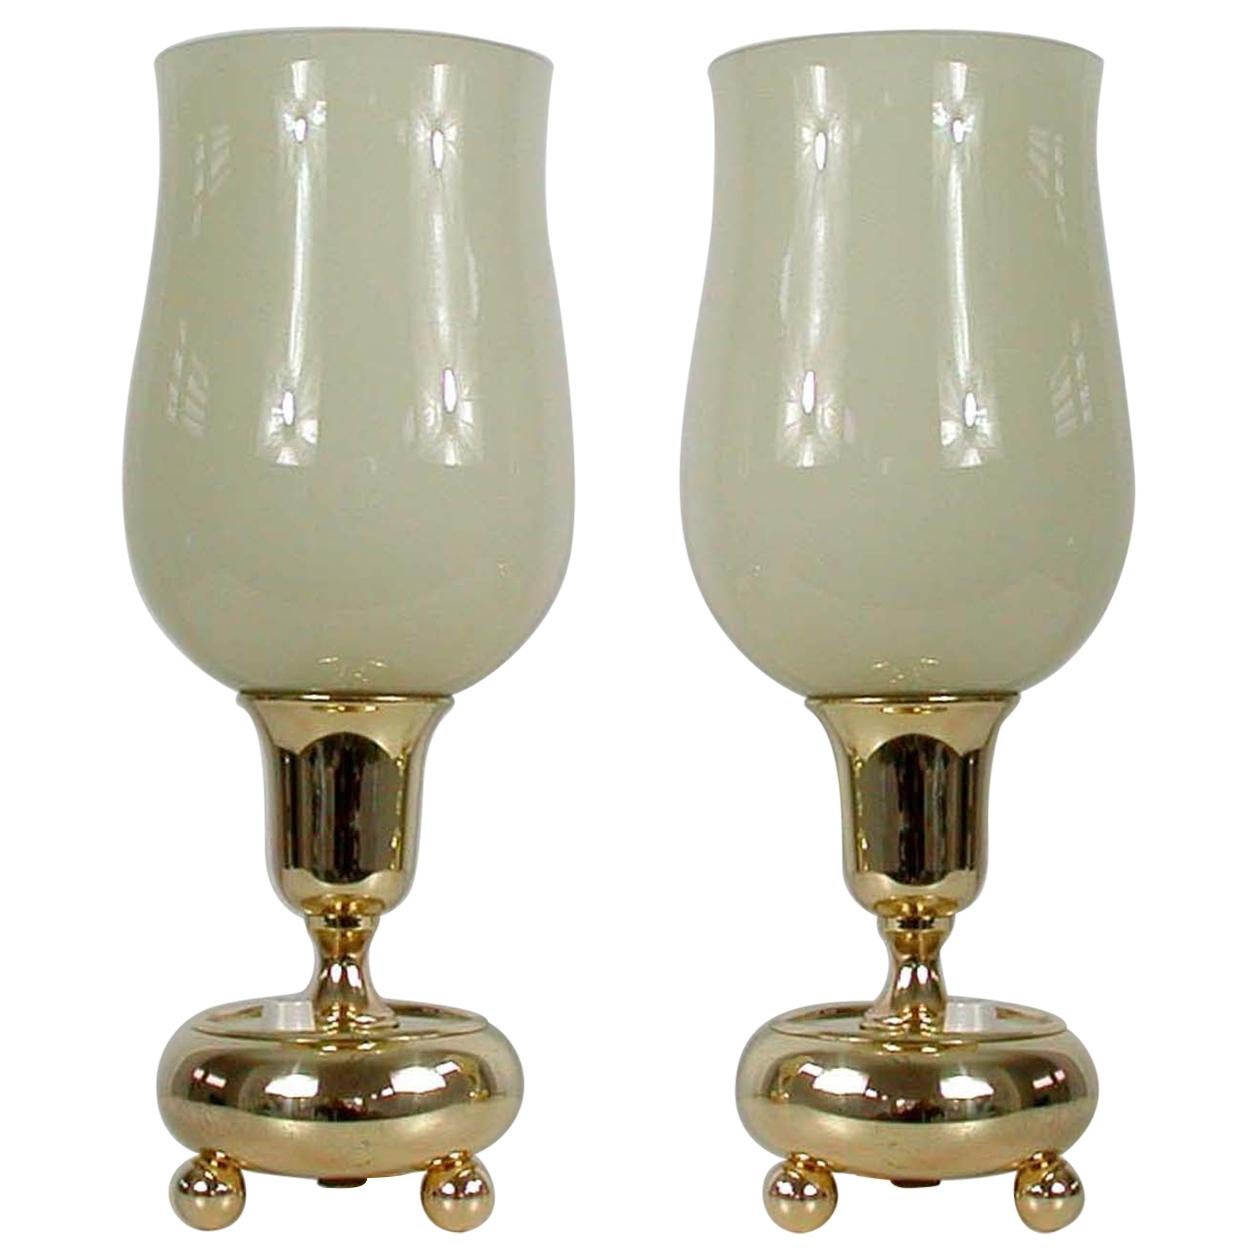 German Bauhaus Brass and Opal Torchiere Table Lamps, Set of 2, 1930s For Sale